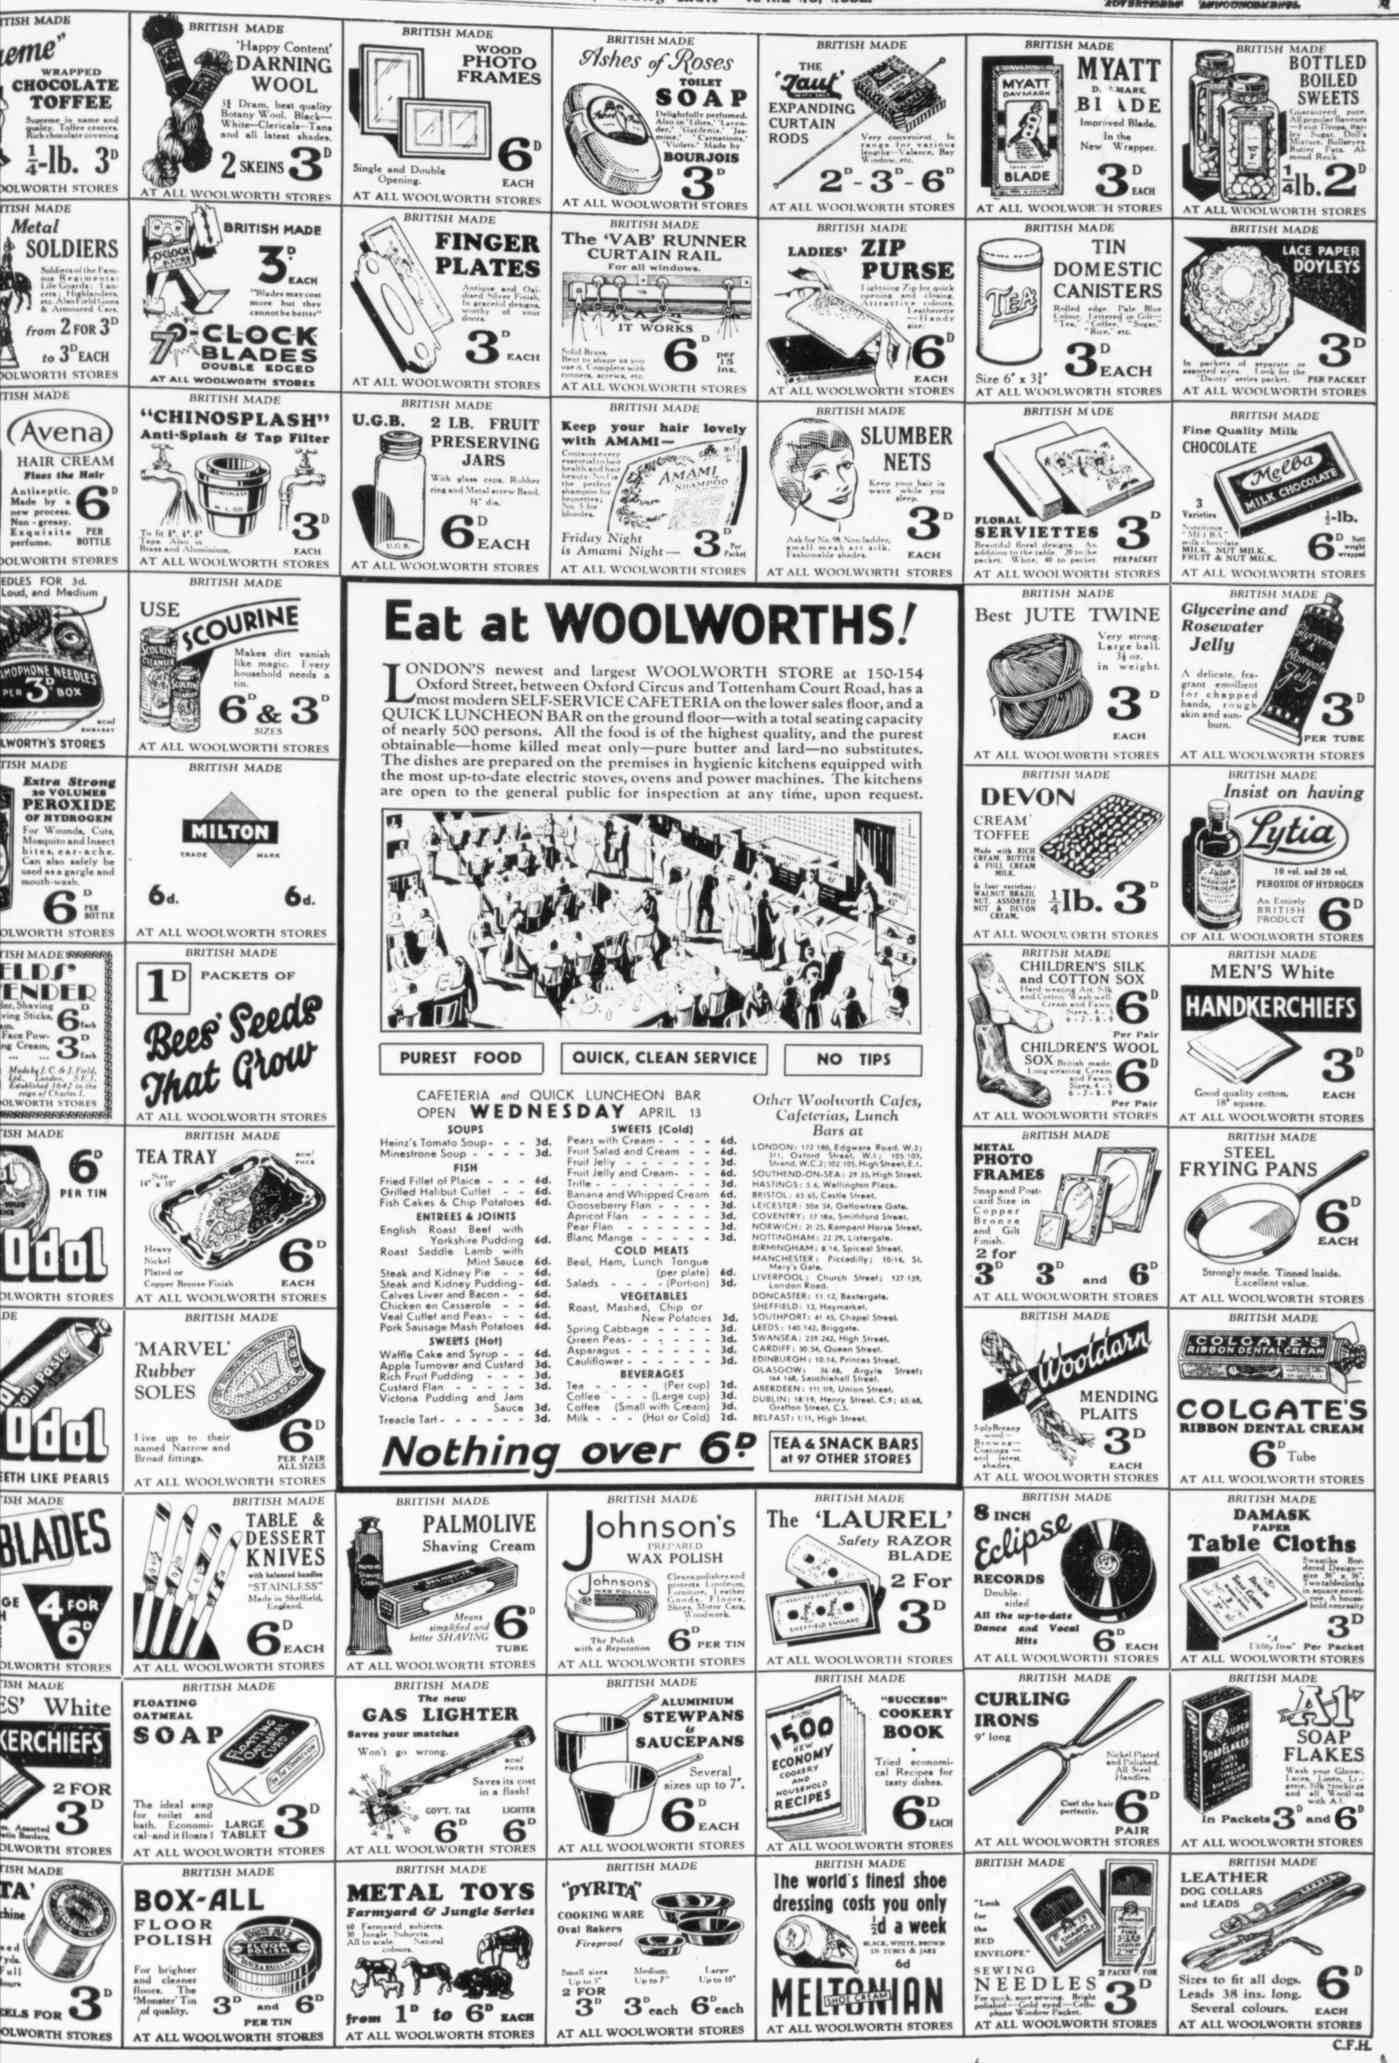 From the Daily Mail in 1931, a full page advertisement ostensibly promoting a new store in London's Oxford Street, which also served to boost the shares of the newly-listed Woolworth business in the British Isles